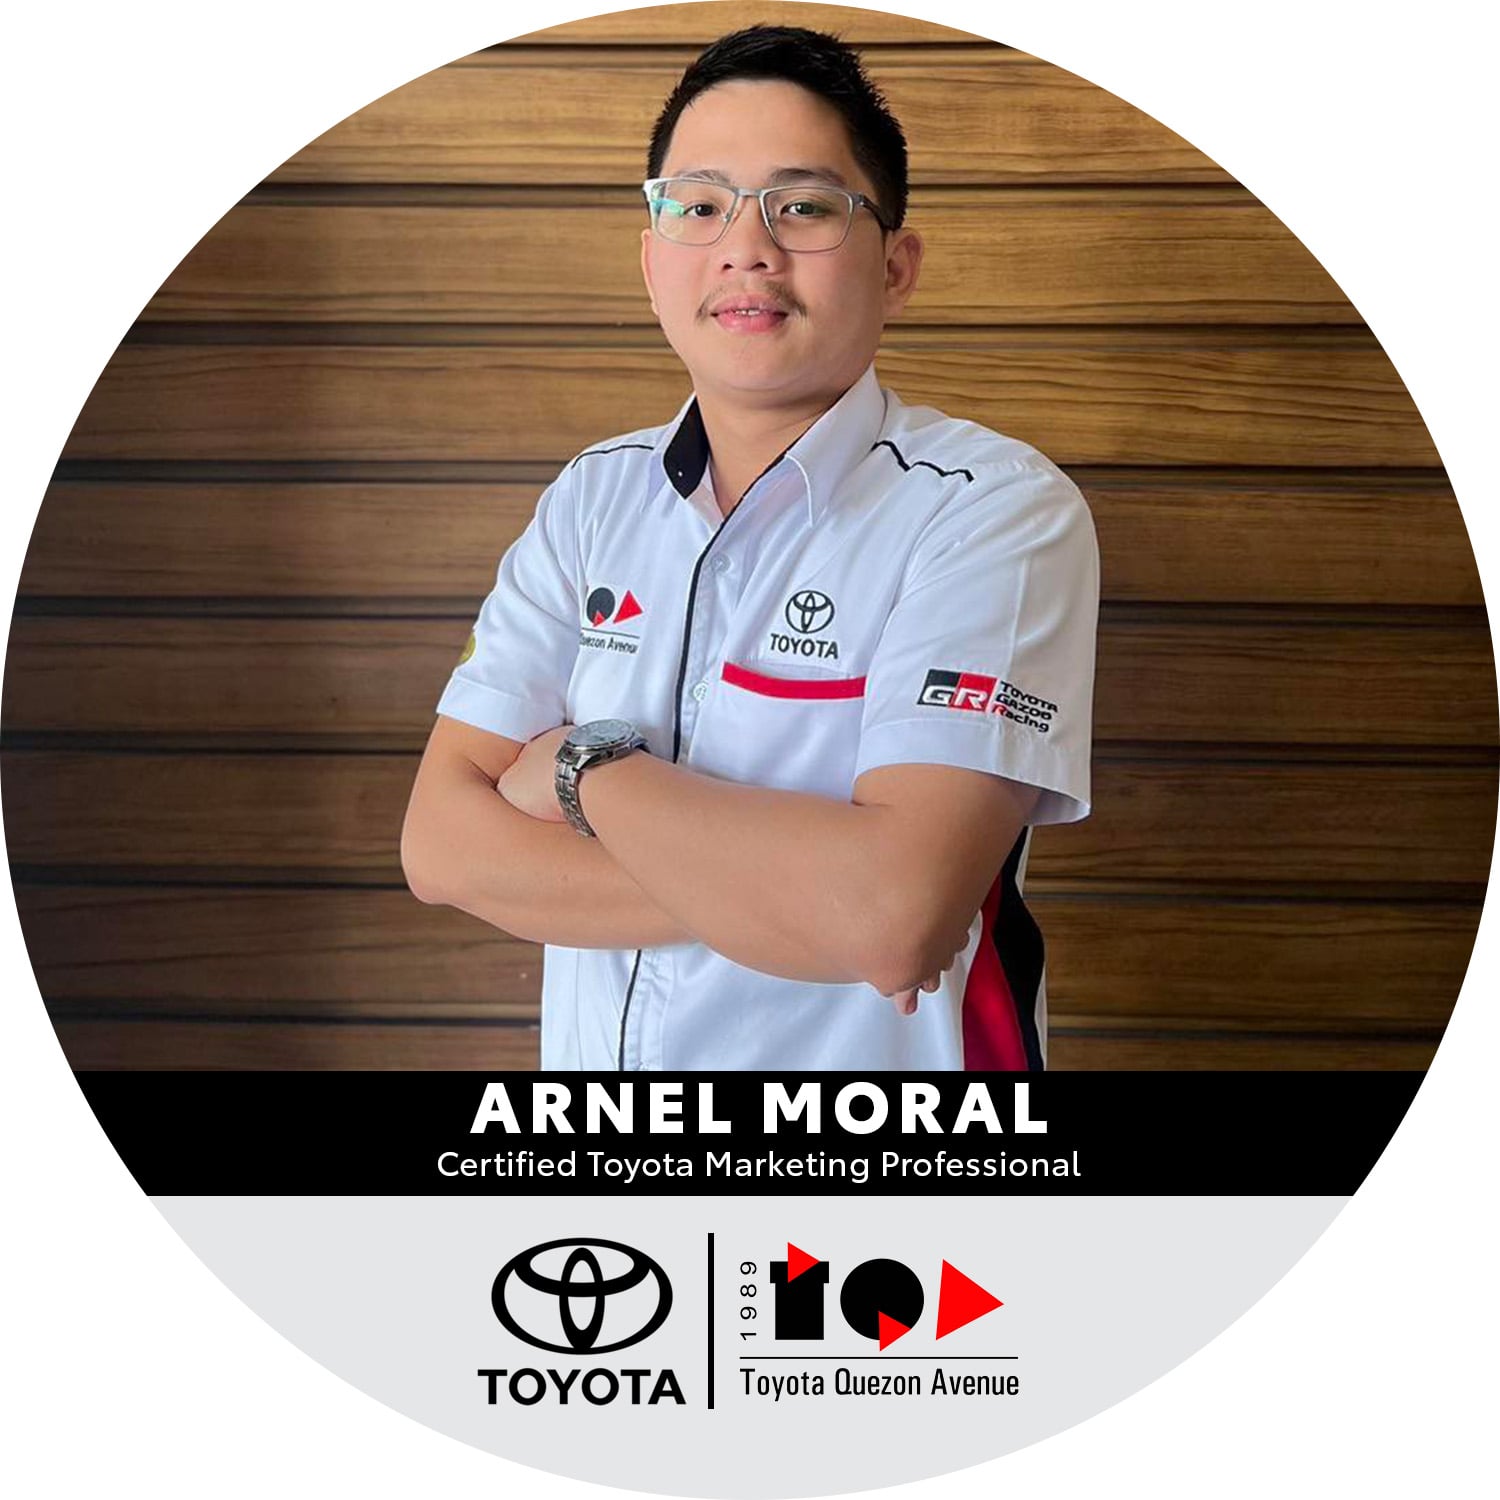 Certified Toyota Marketing Professionals - Arnel Moral